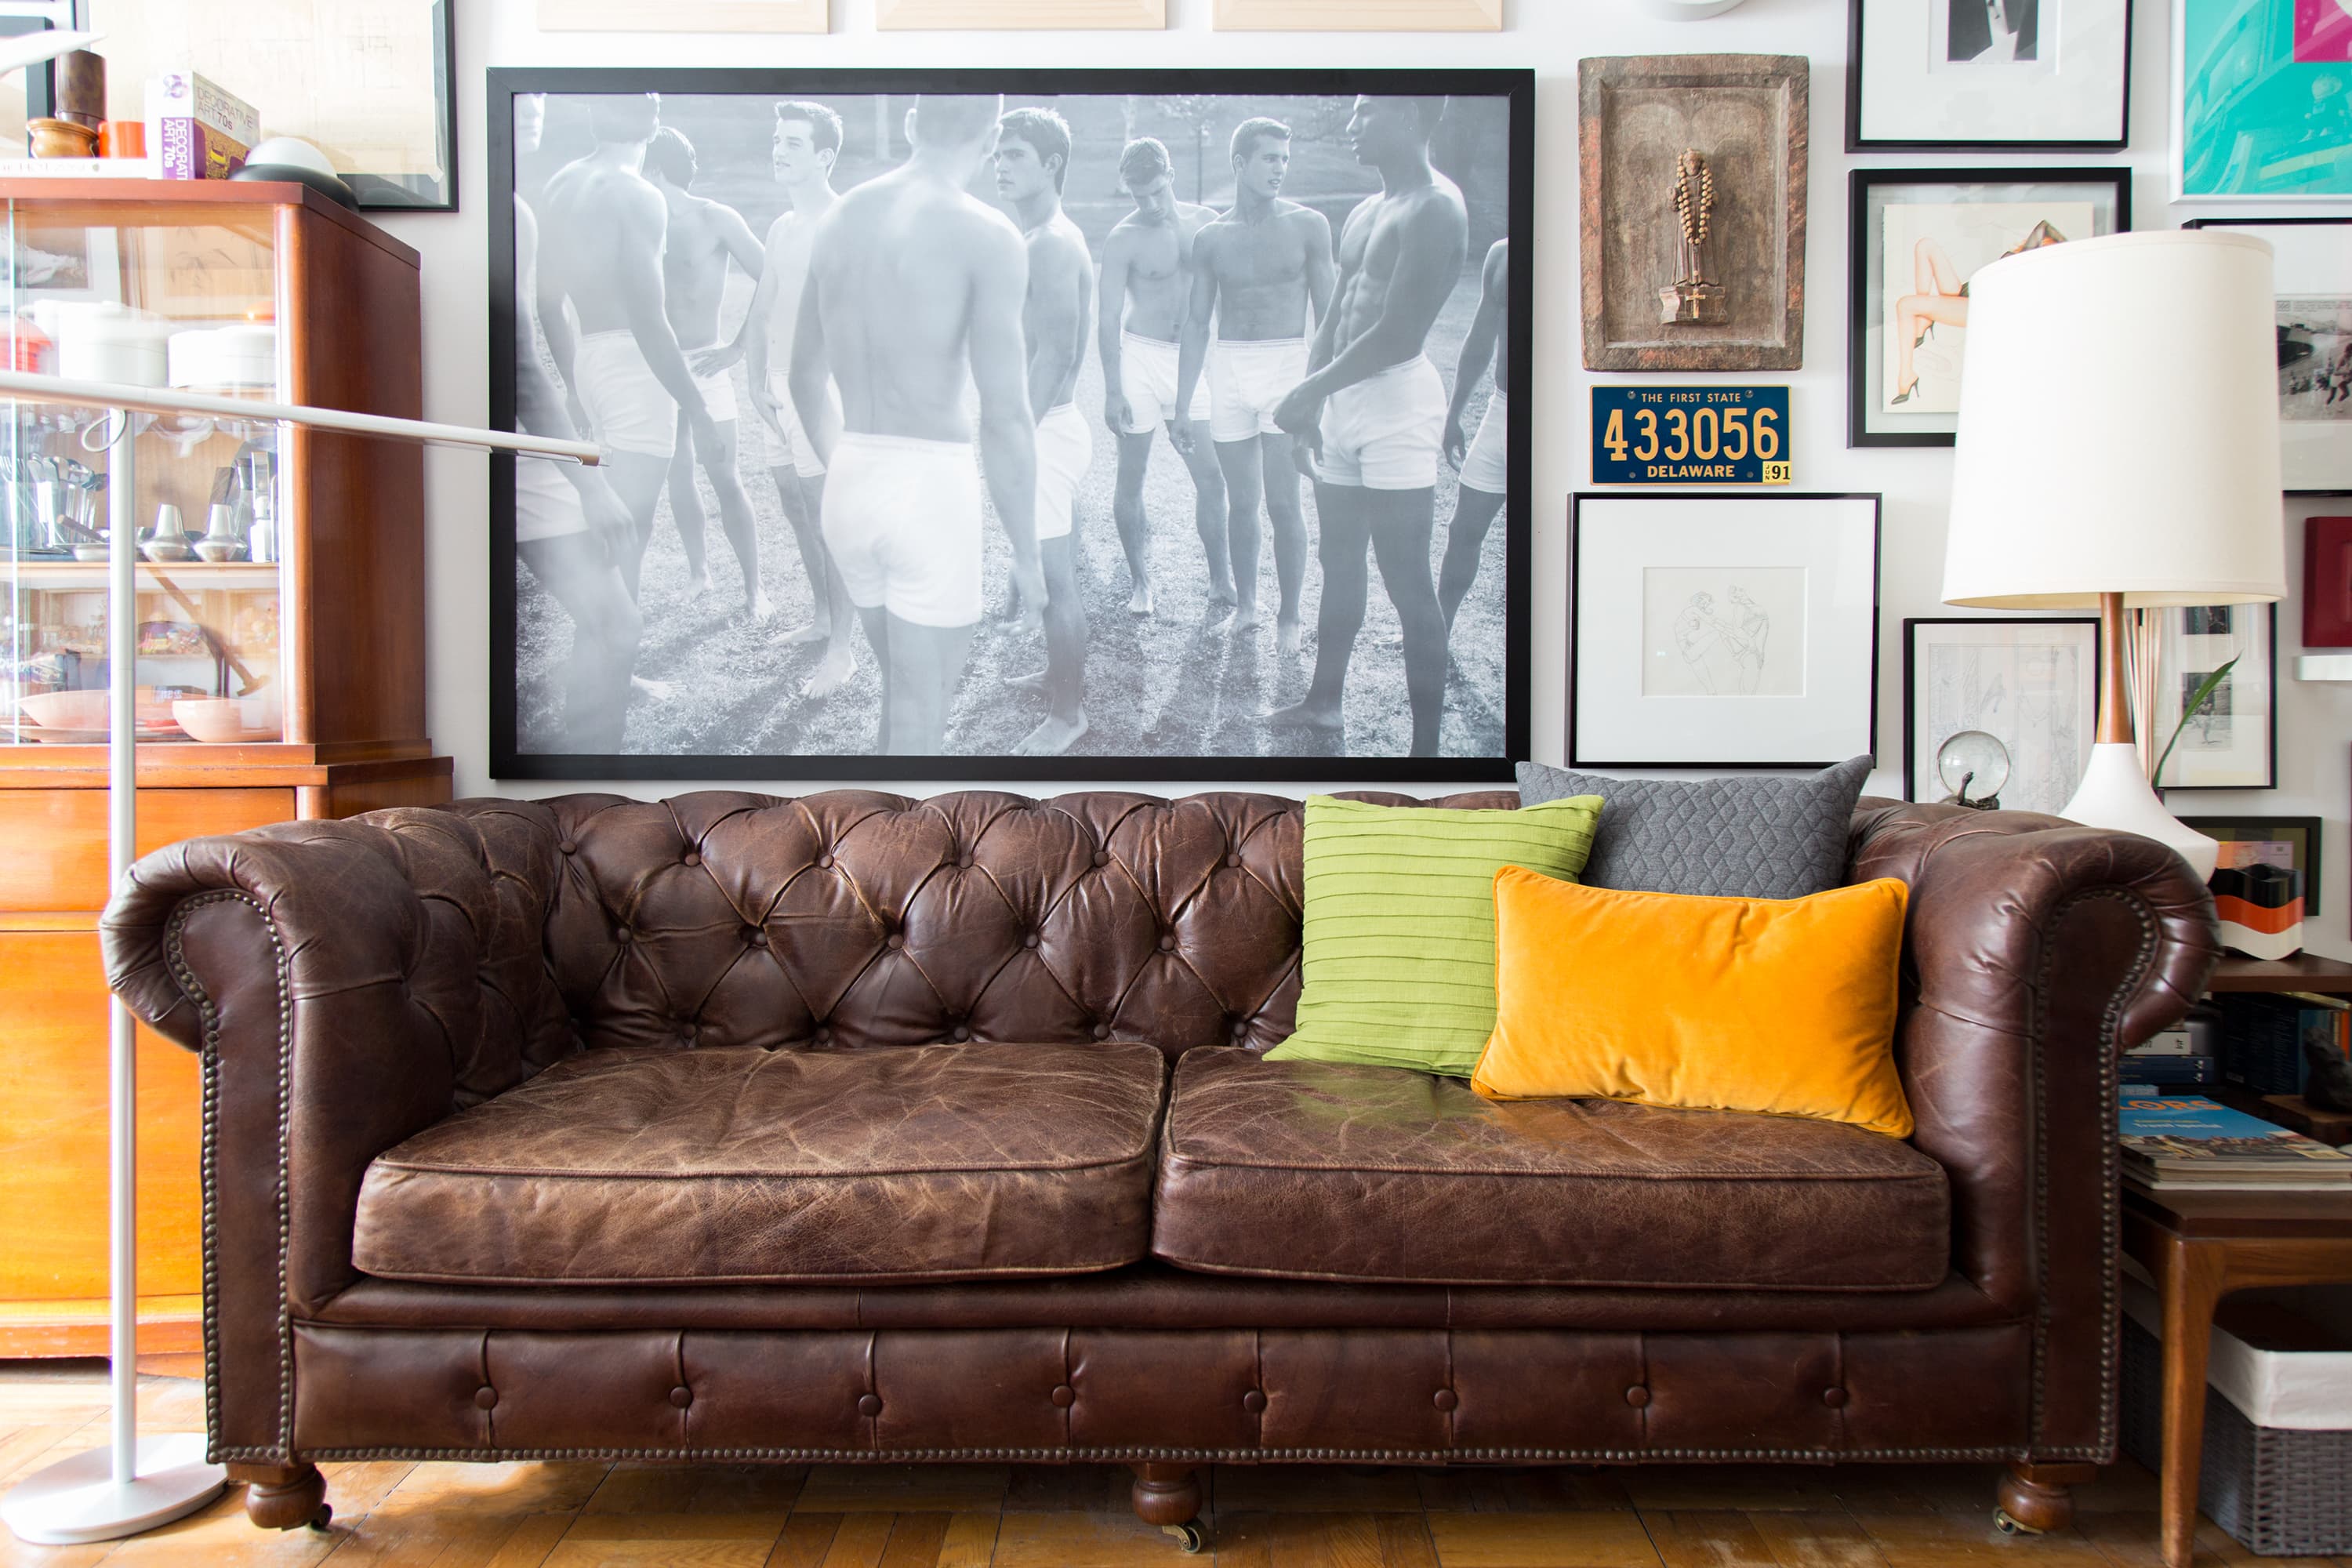 How to clean a velvet couch – and the mistakes that will ruin it